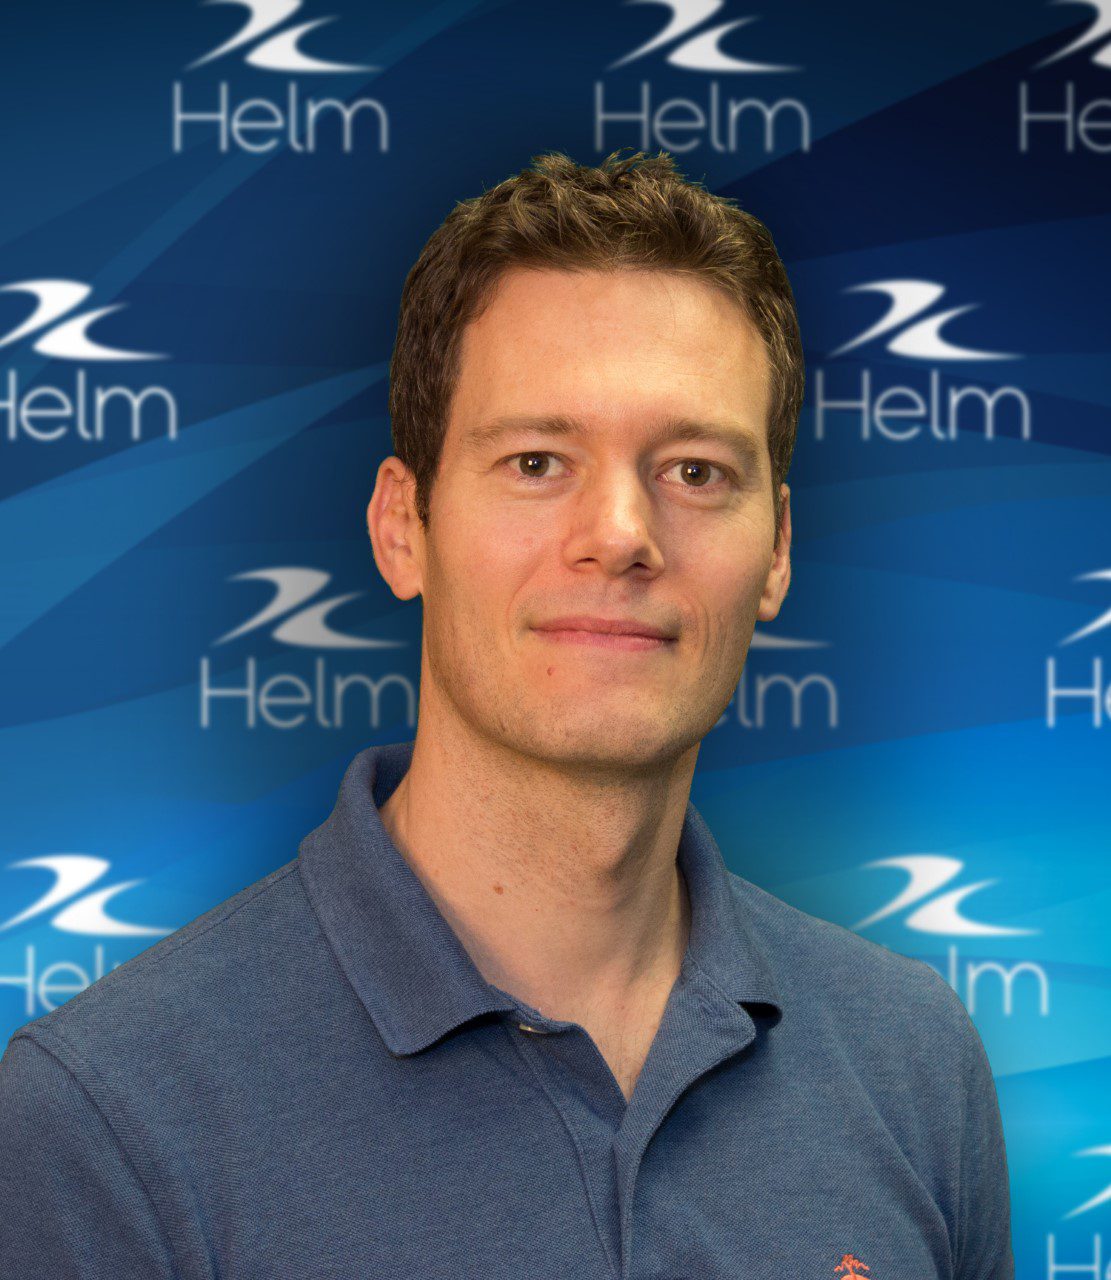 Helm Operations Celebrates Customer Success at Helm Conference 2022